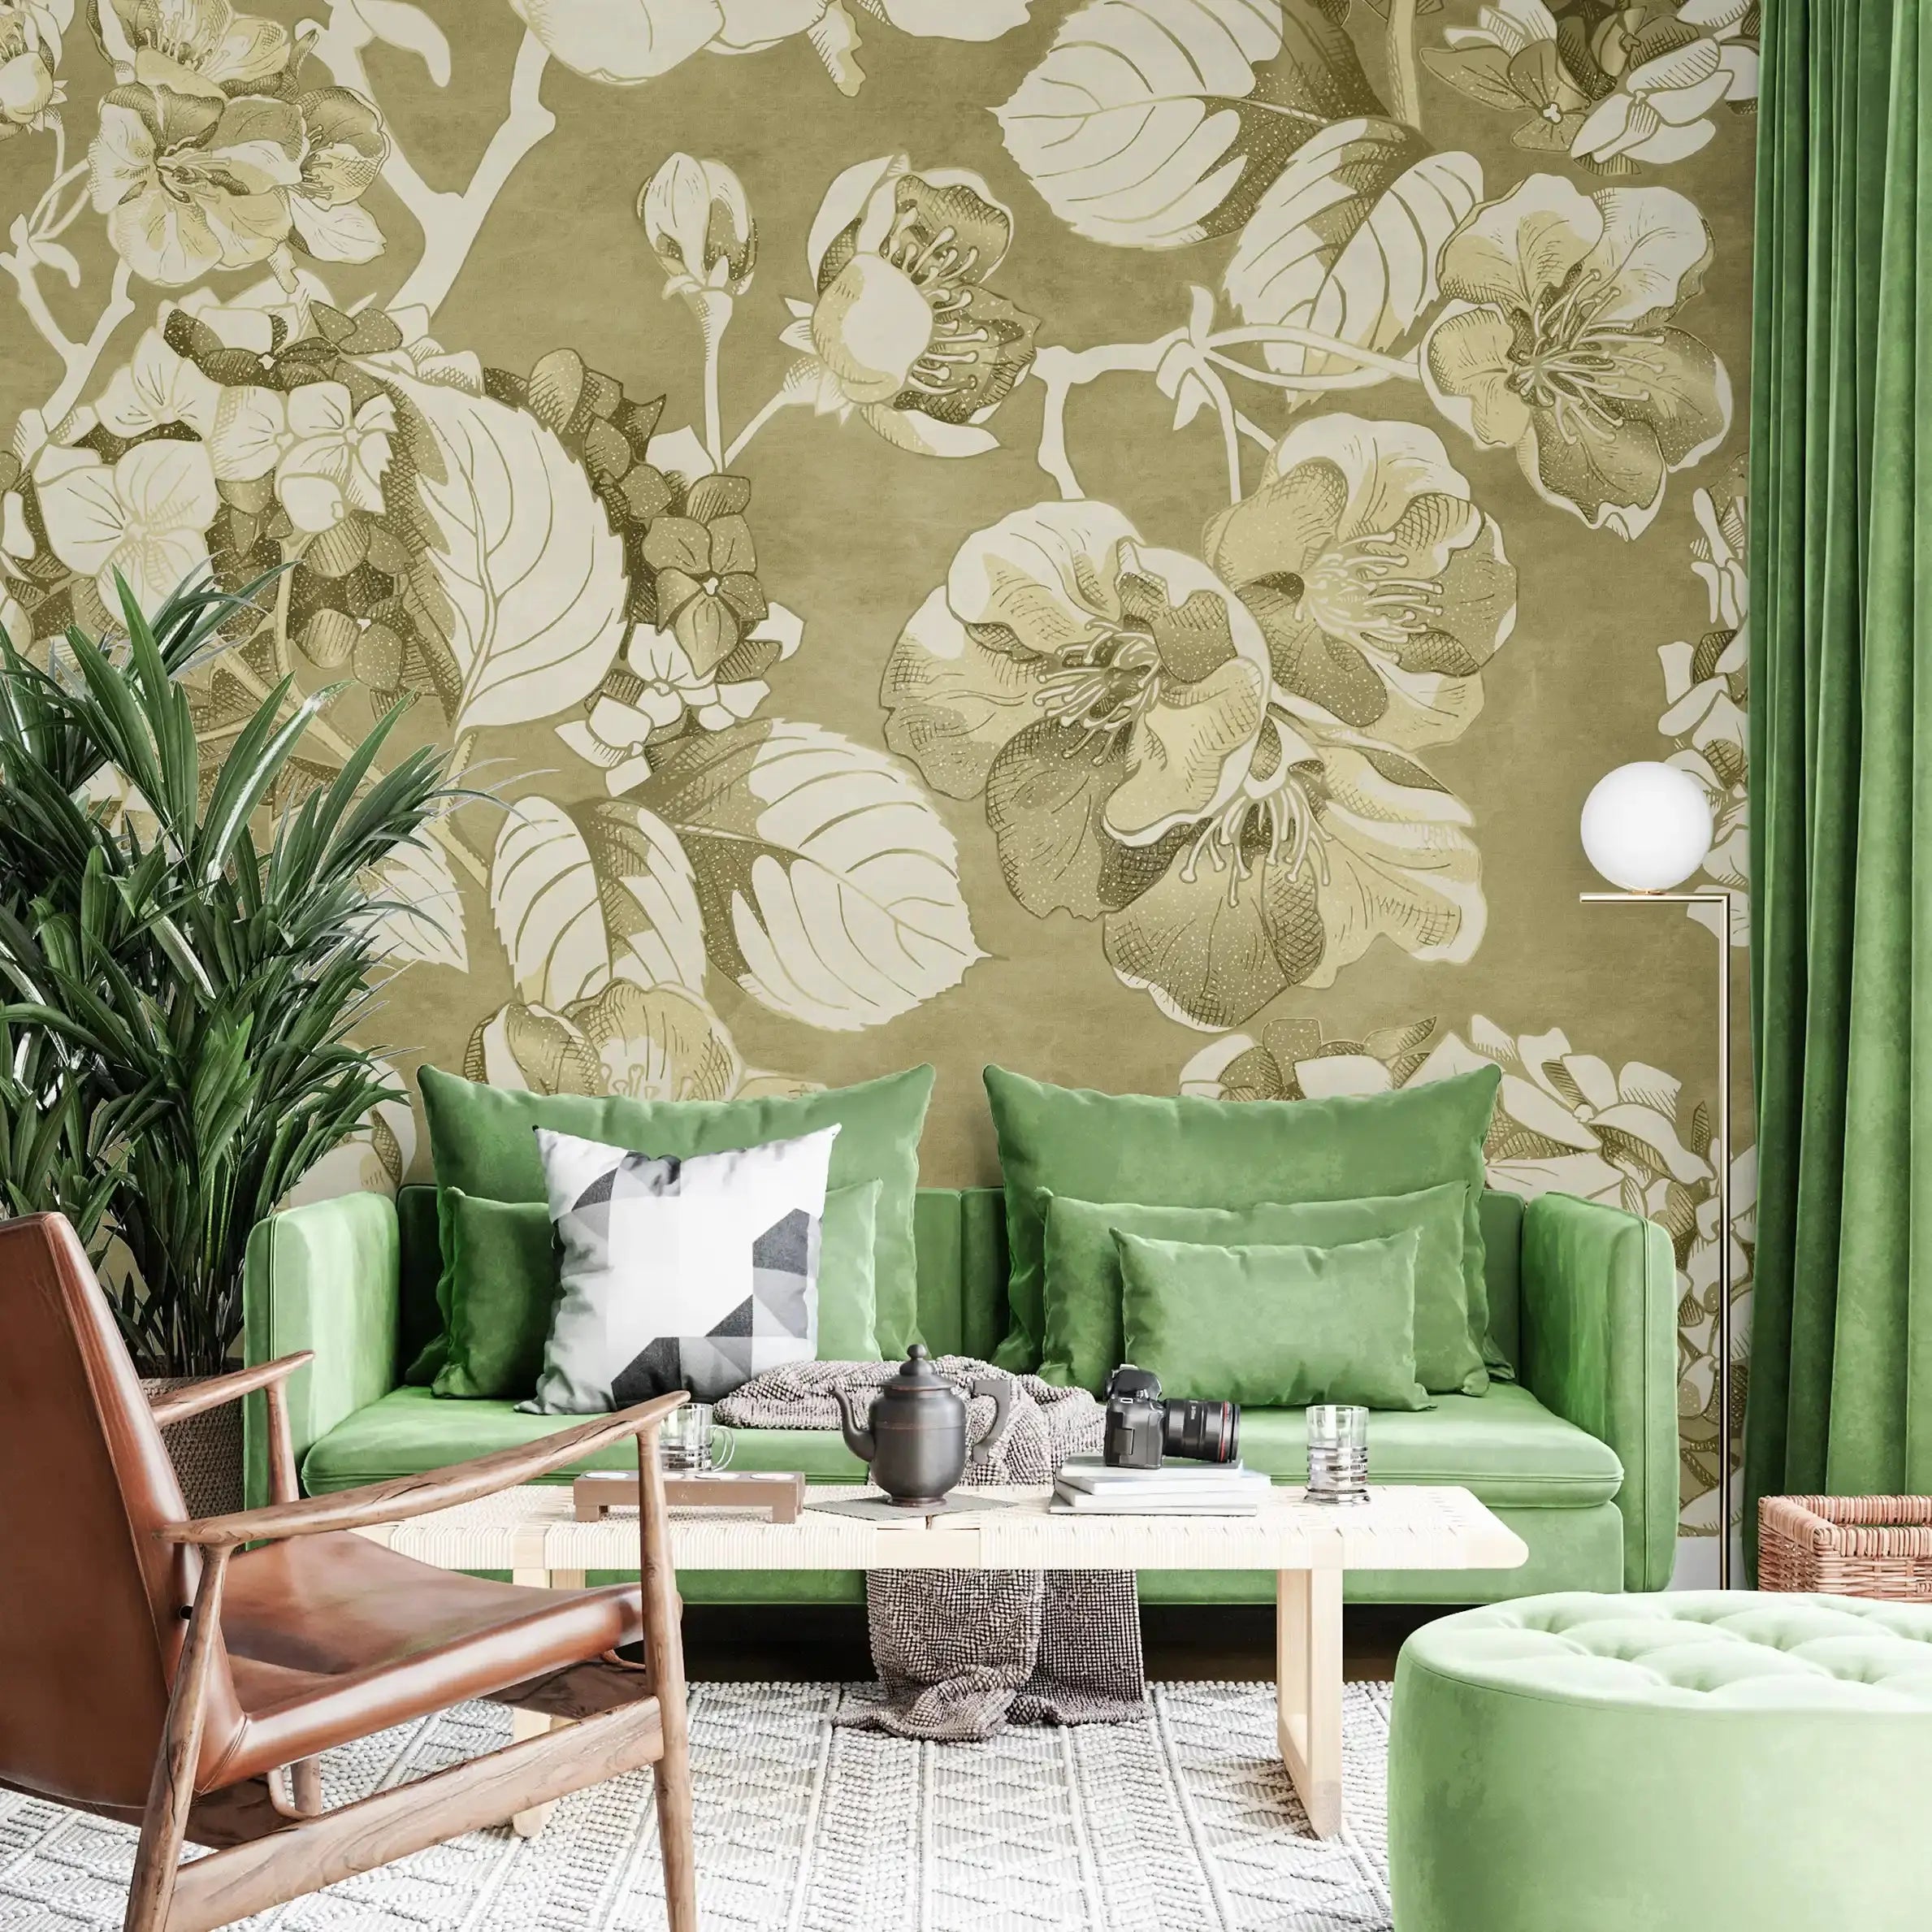 3036-D / Vintage Floral Mural Wallpaper: Green and Beige Art Style, Easy Install for Accent Wall Decor and Bathroom - Artevella